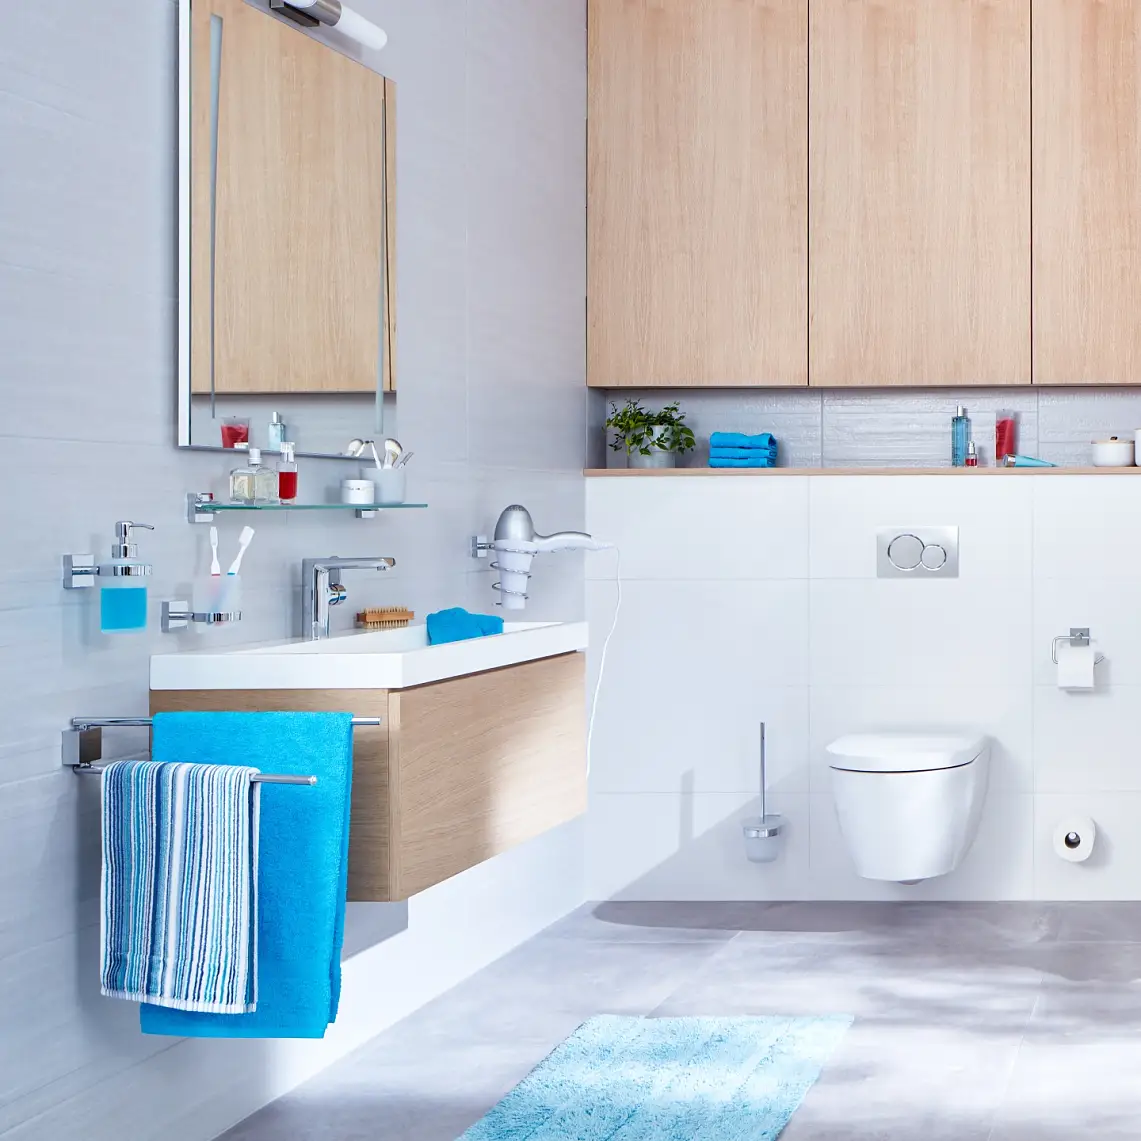 Clear design and straight structures for an organised bathroom experience.